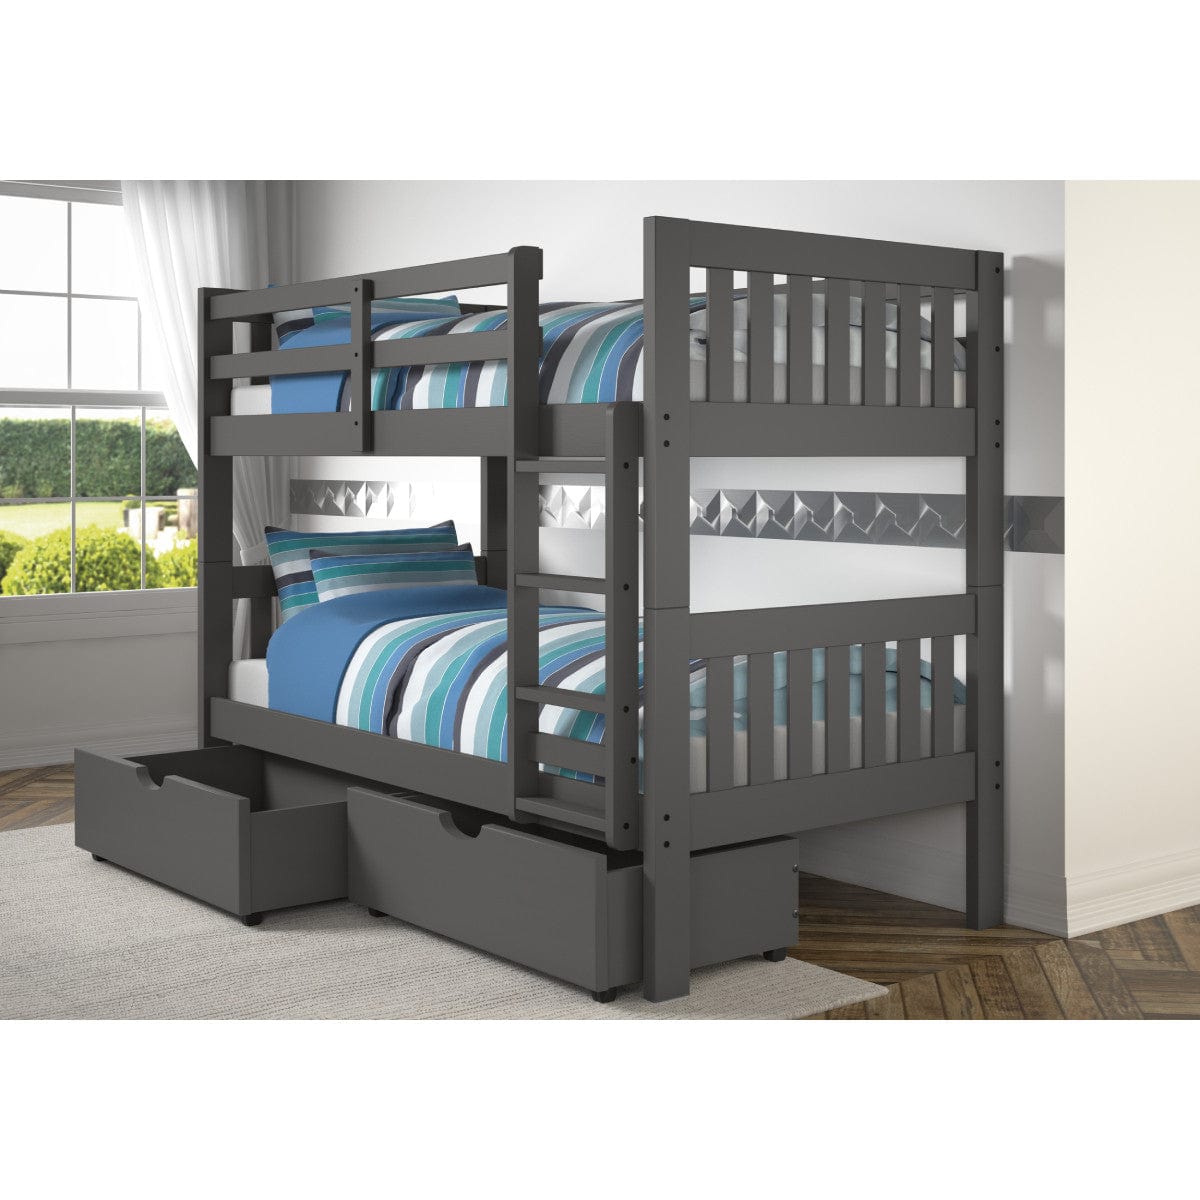 Bunk Bed with Storage Drawers - Bedroom Depot USA